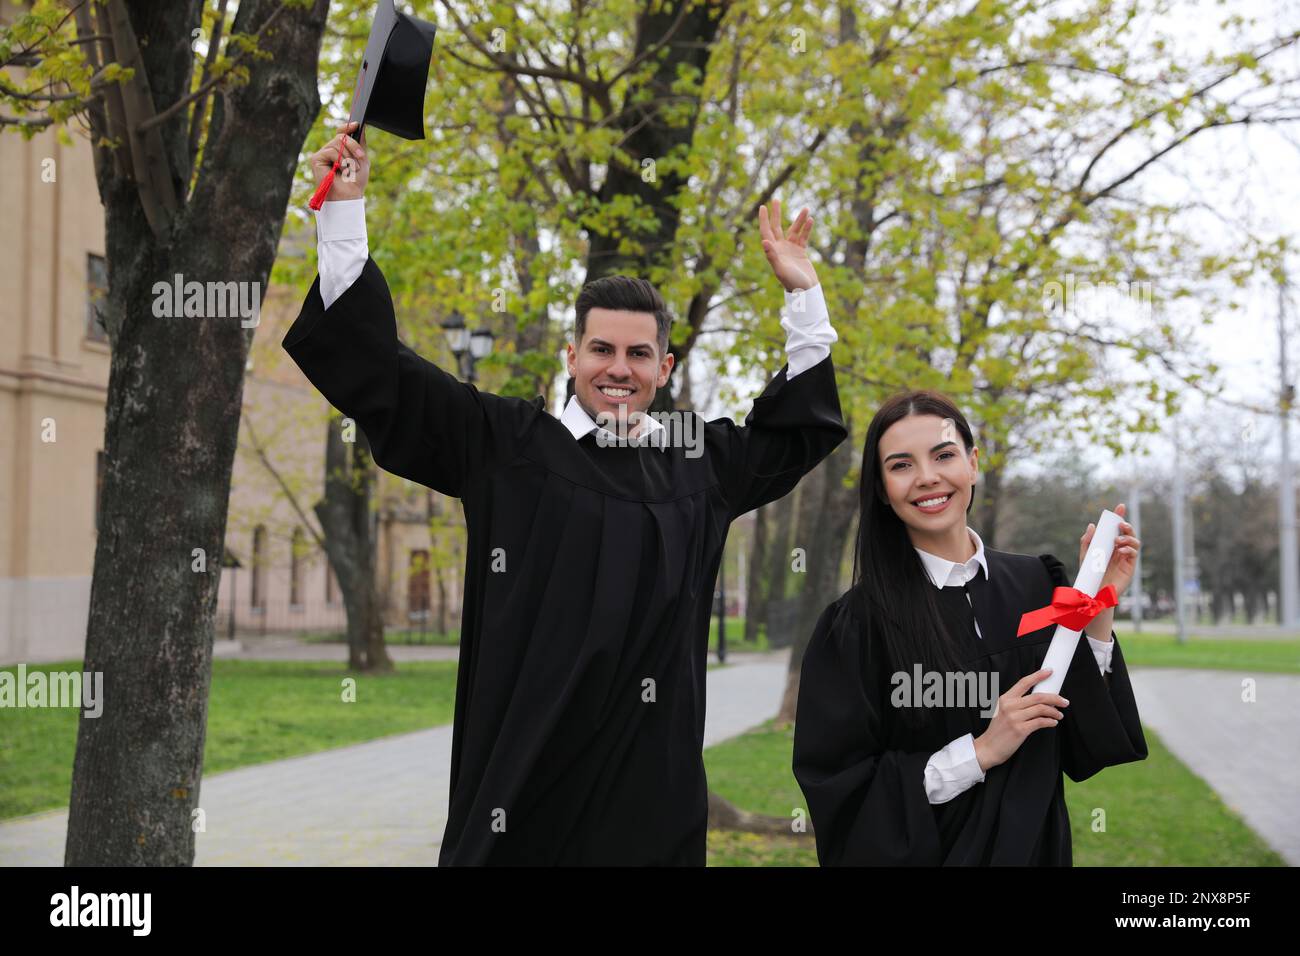 Happy students with diplomas after graduation ceremony outdoors Stock Photo